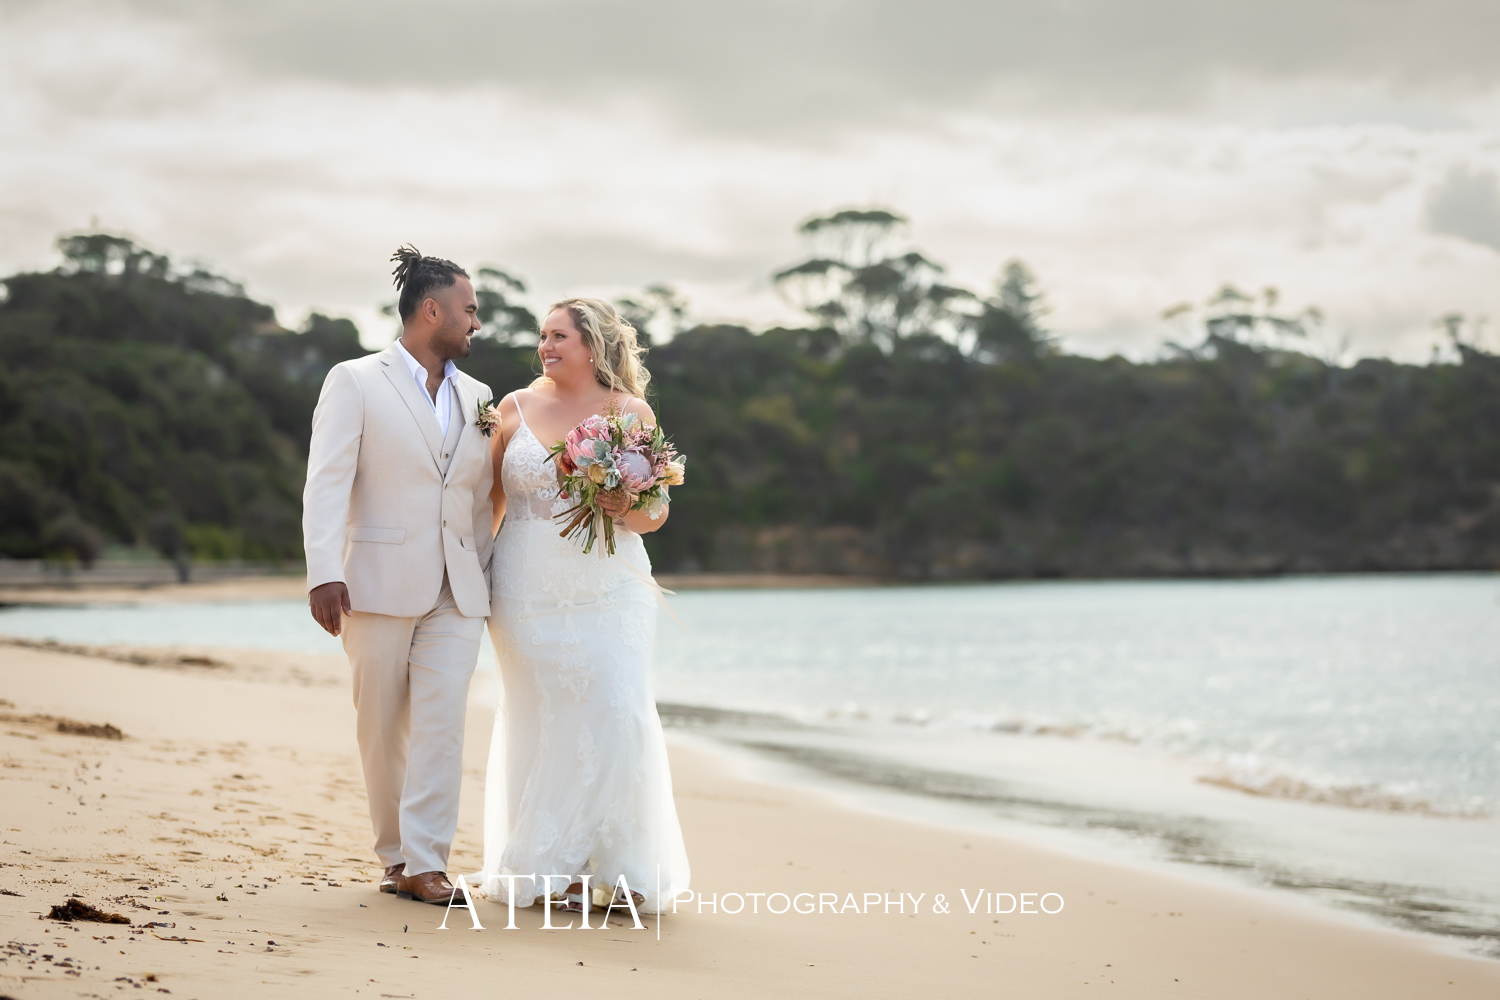 , Alexandra and Max&#8217;s wedding photography at All Smiles Sorrento captured by ATEIA Photography &#038; Video